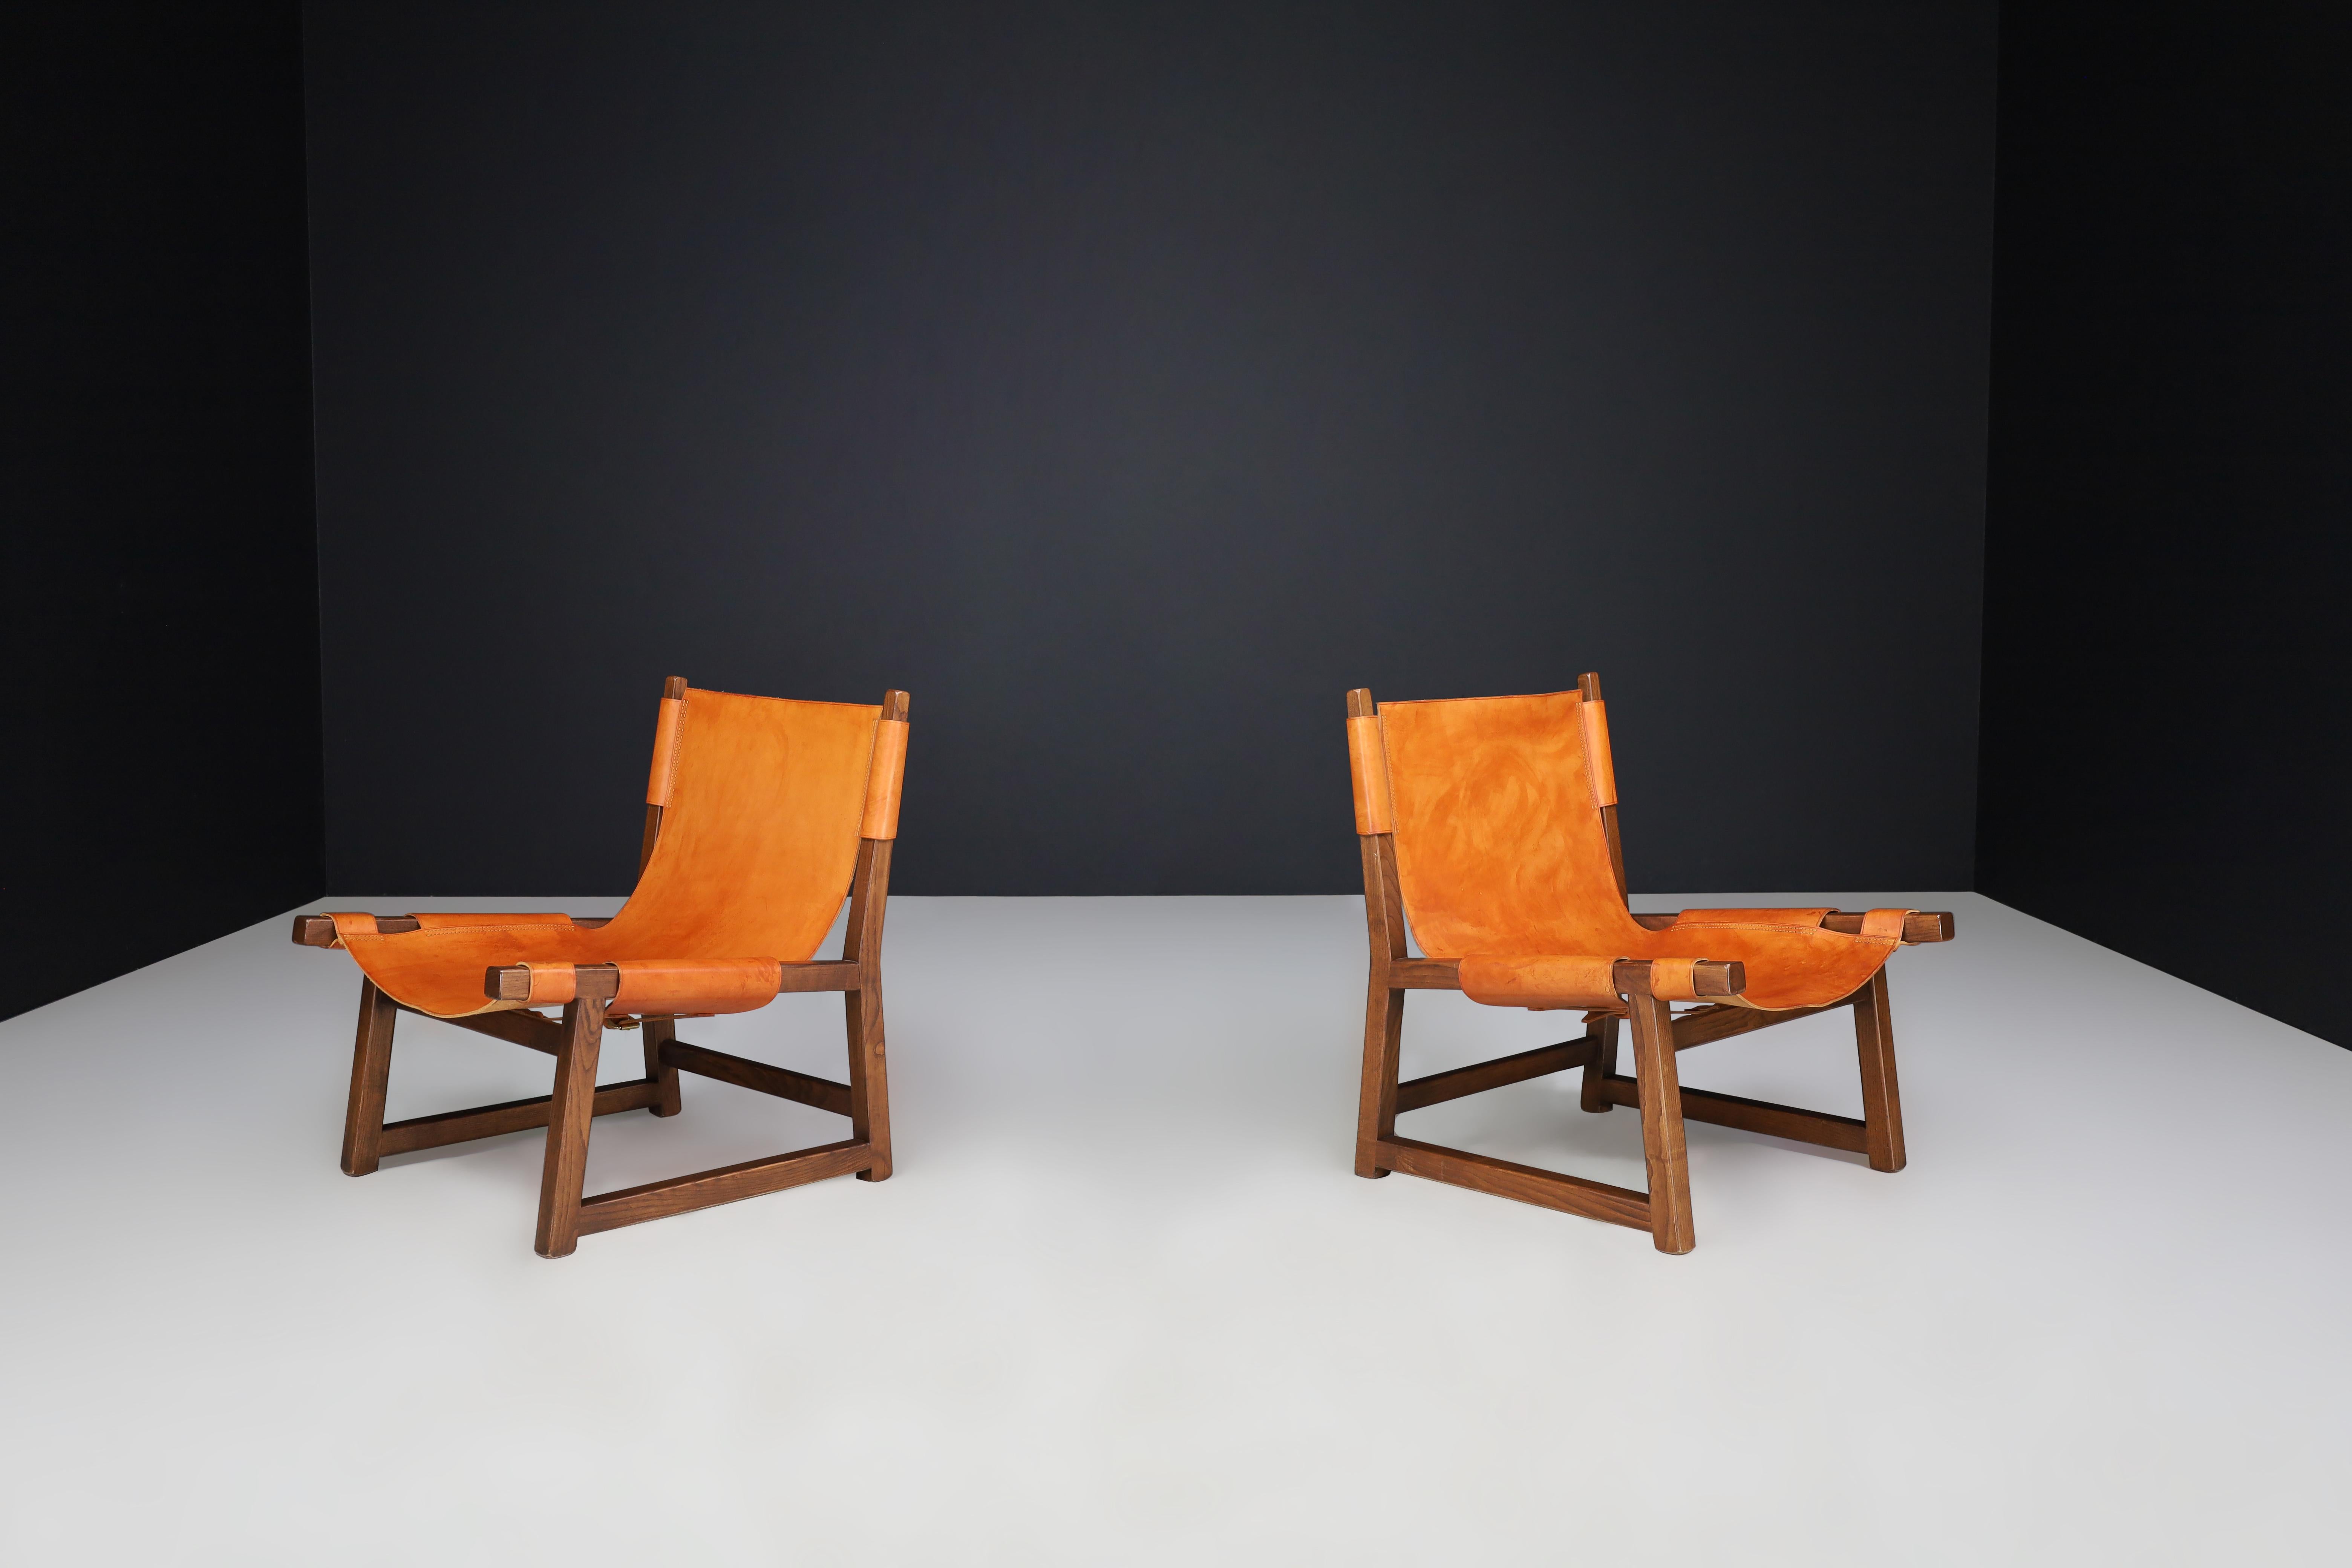 Paco Muñoz pair of 'Riaza' lounge chairs In Walnut and Cognac Leather, Spain 1960s

Paco Muñoz designed this pair of 'Riaza' lounge chairs in Spain during the 1960s for Darro. The chairs are made of a sturdy walnut frame and cognac leather, which is